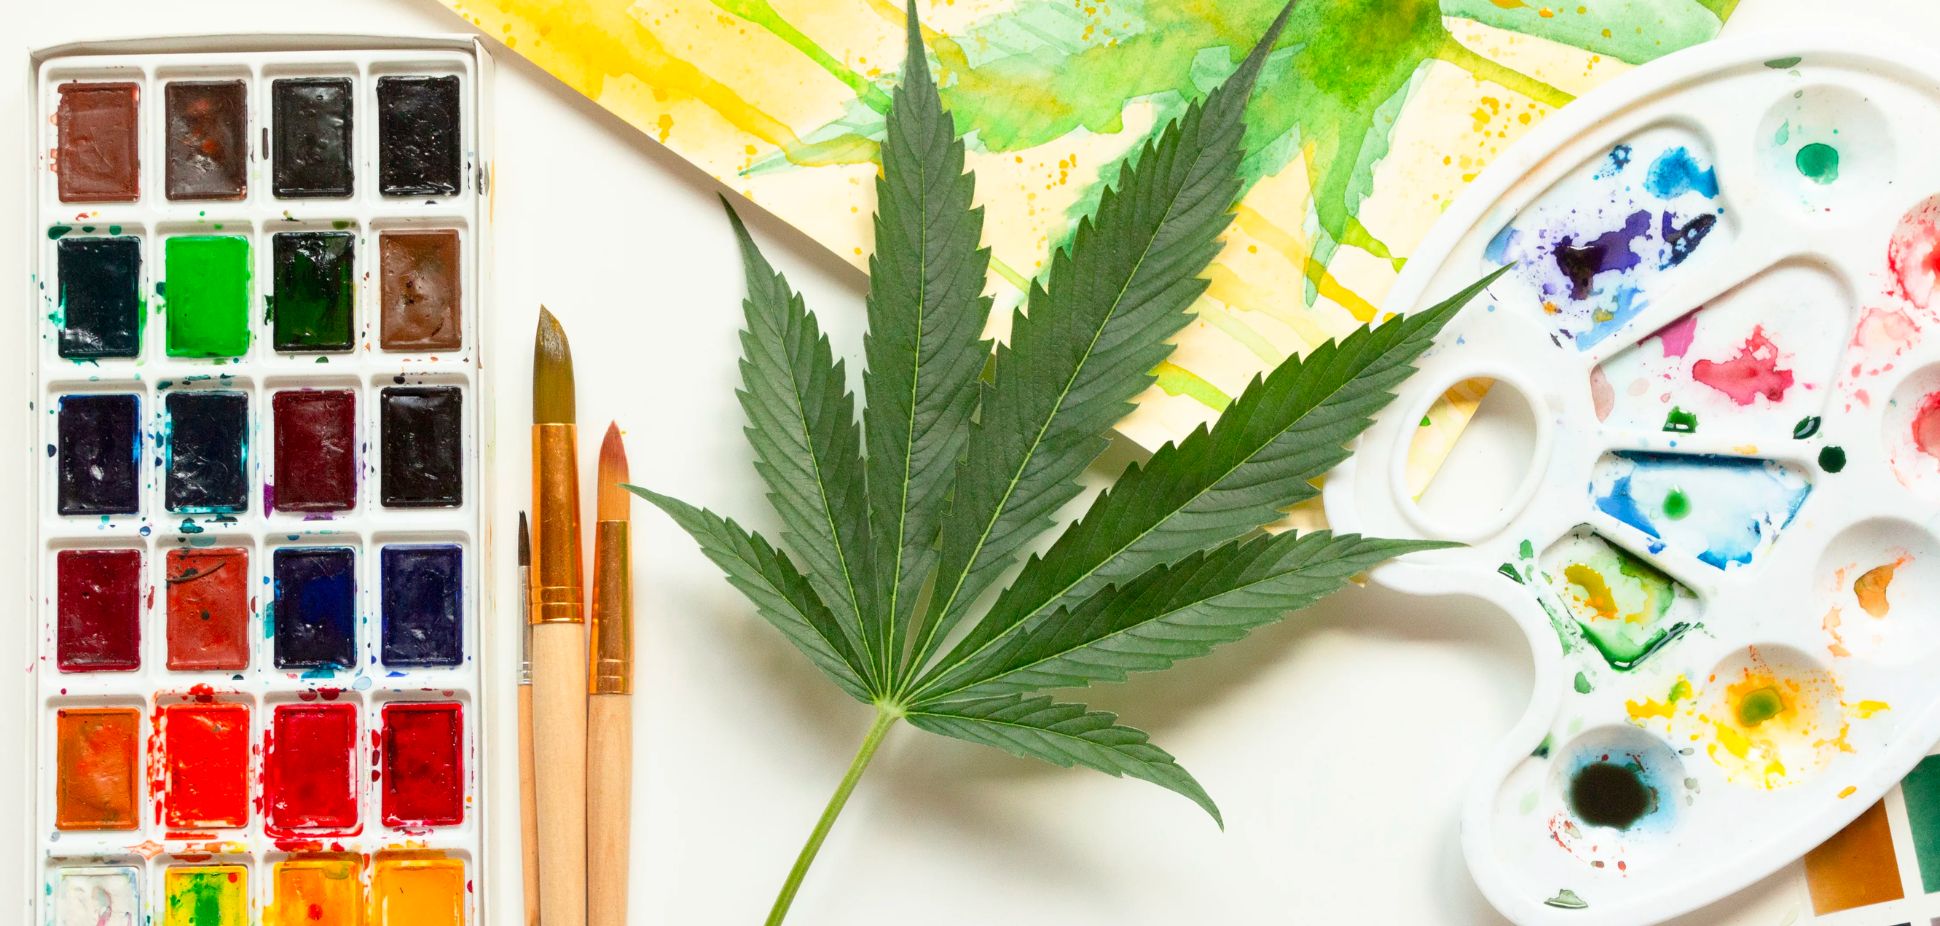 High on Creativity: How Cannabis Fuels the Fire of Imagination